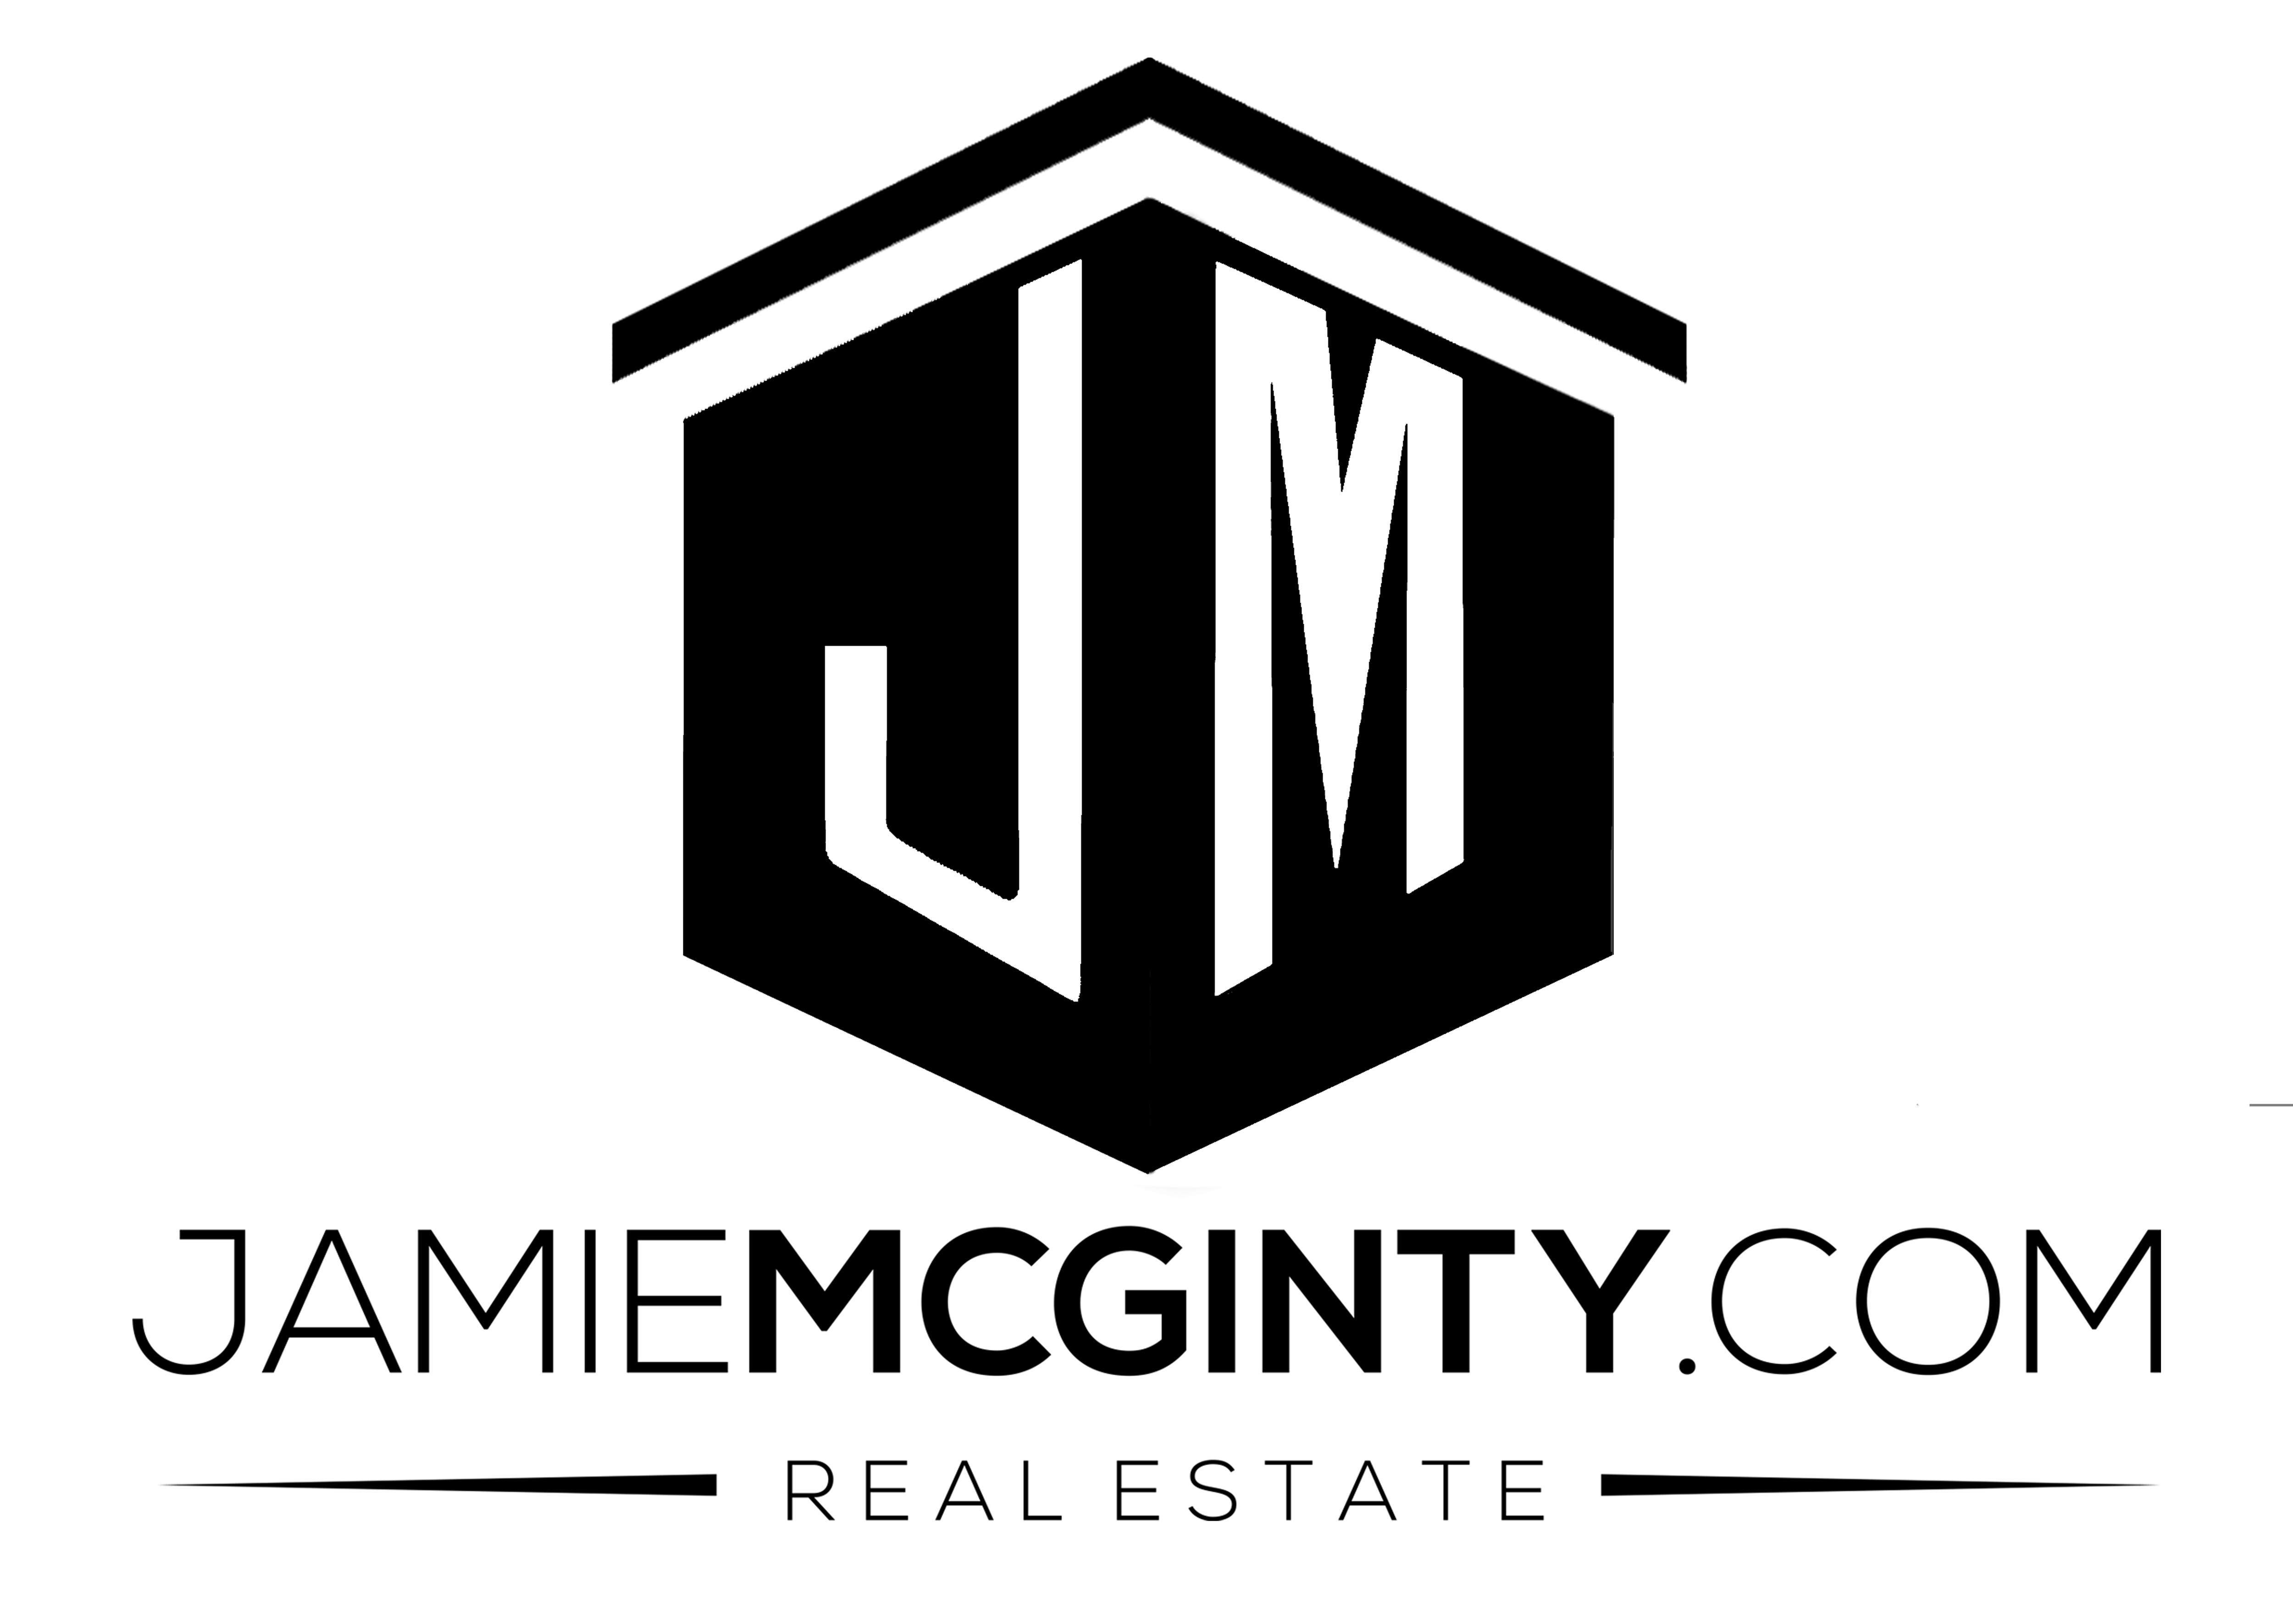 Jamie McGinty Real Estate